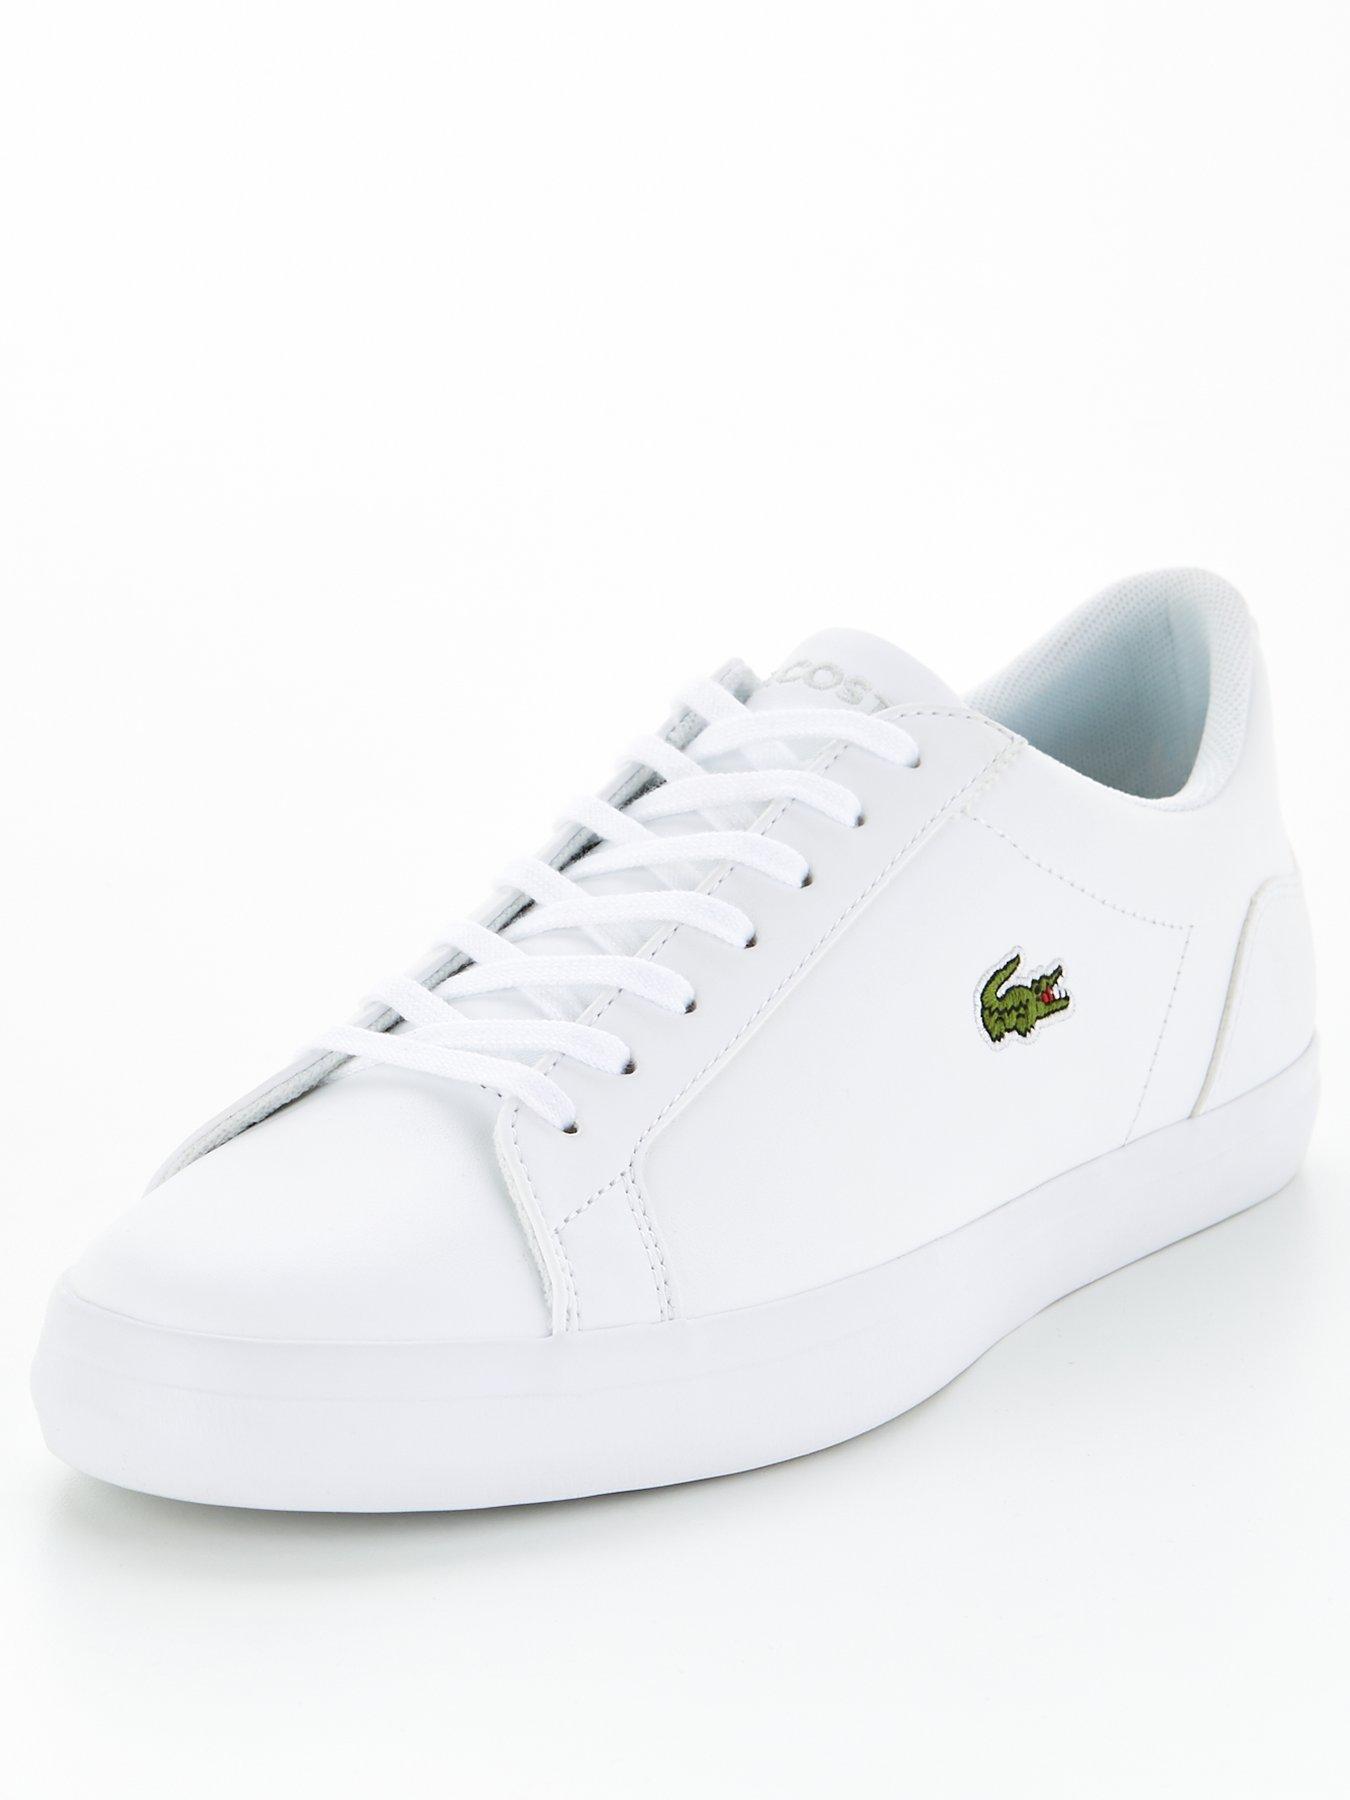 lacoste trainers size 11